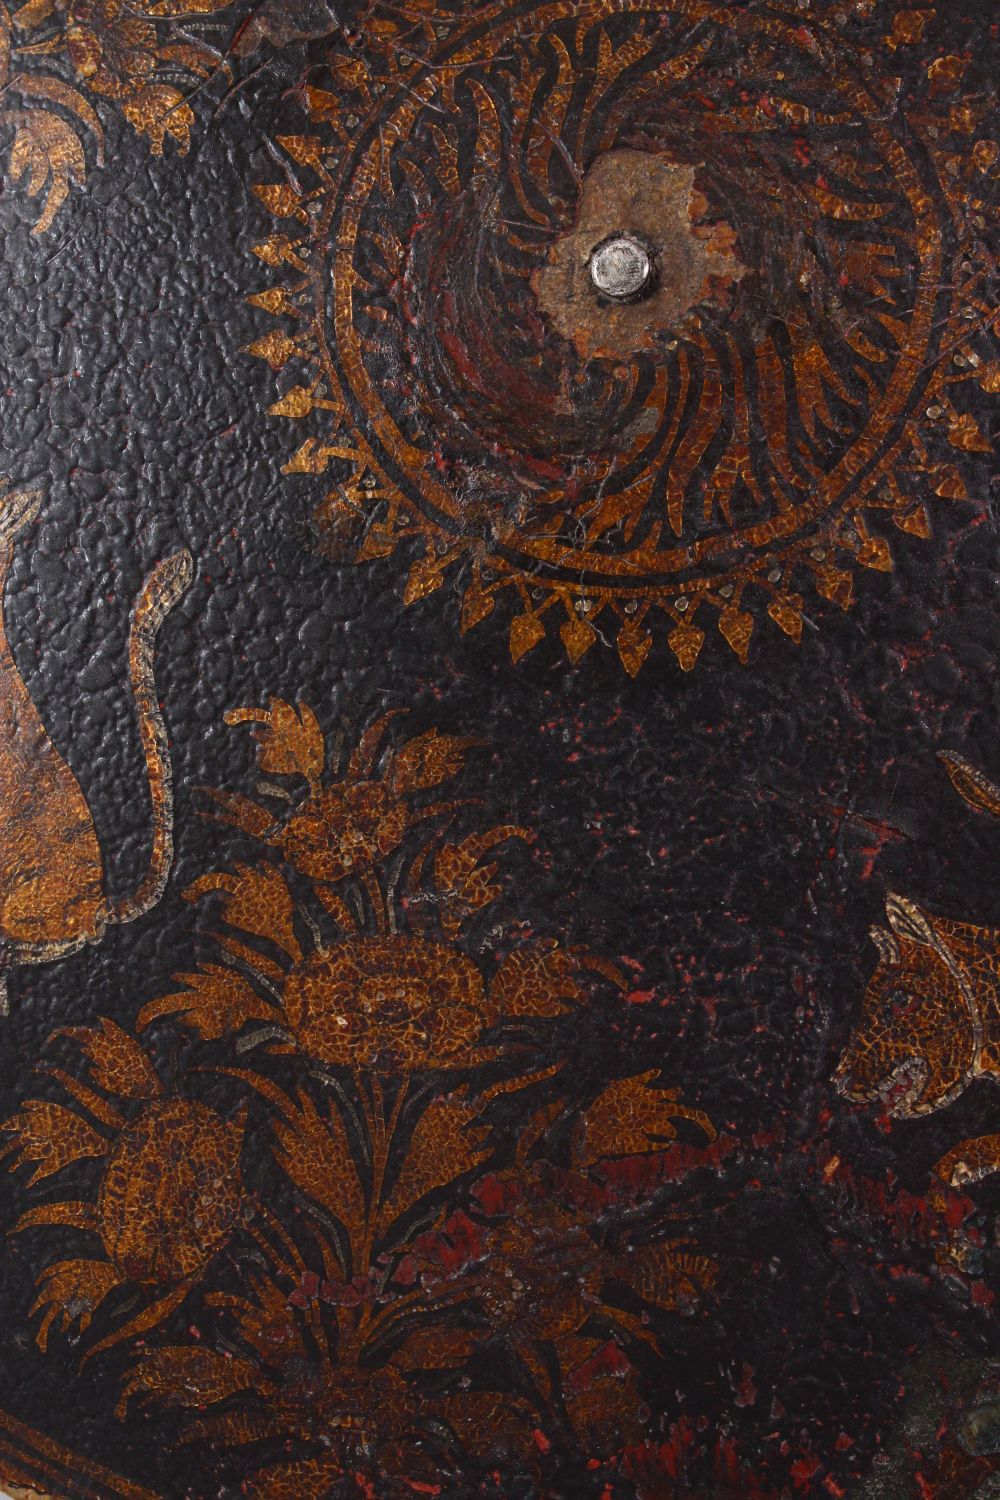 A FINE 18TH/19TH CENTURY INDIAN PAINTED LACQUER LEATHER SHIELD, decorated with a band of tigers, - Image 5 of 10